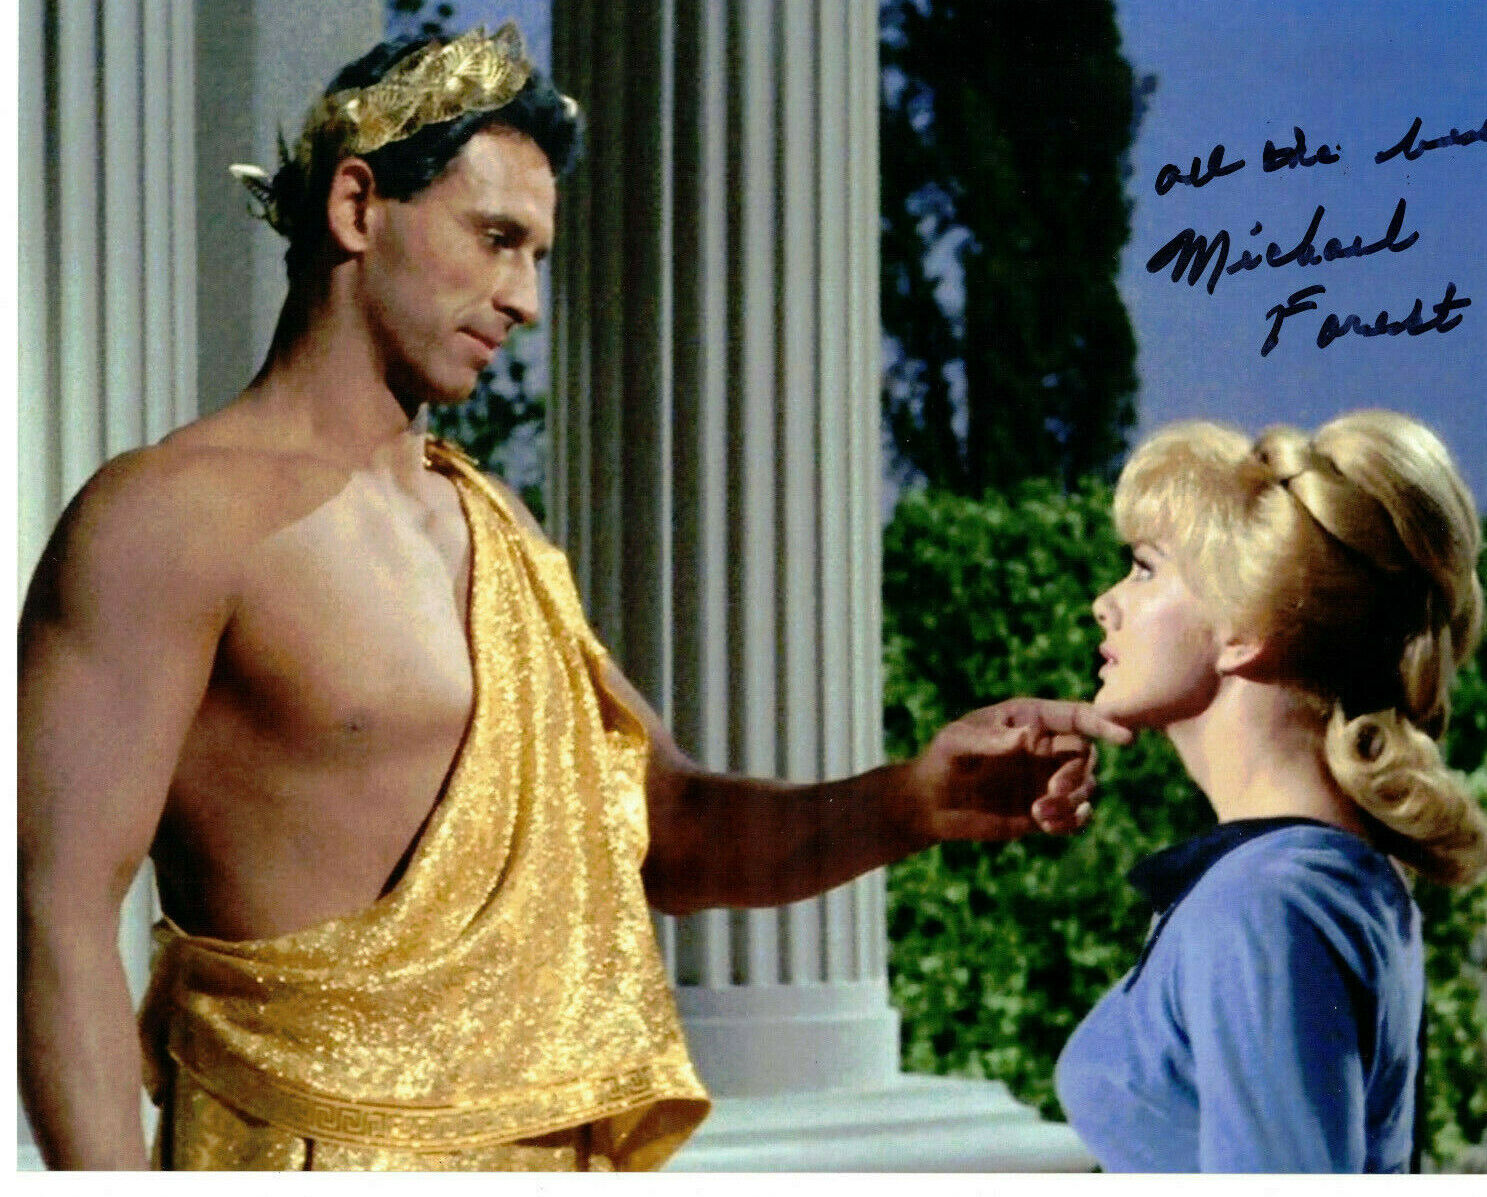 Michael Forest Authentic Signed 8x10 Photo Poster painting Autographed, Star Trek, Apollo